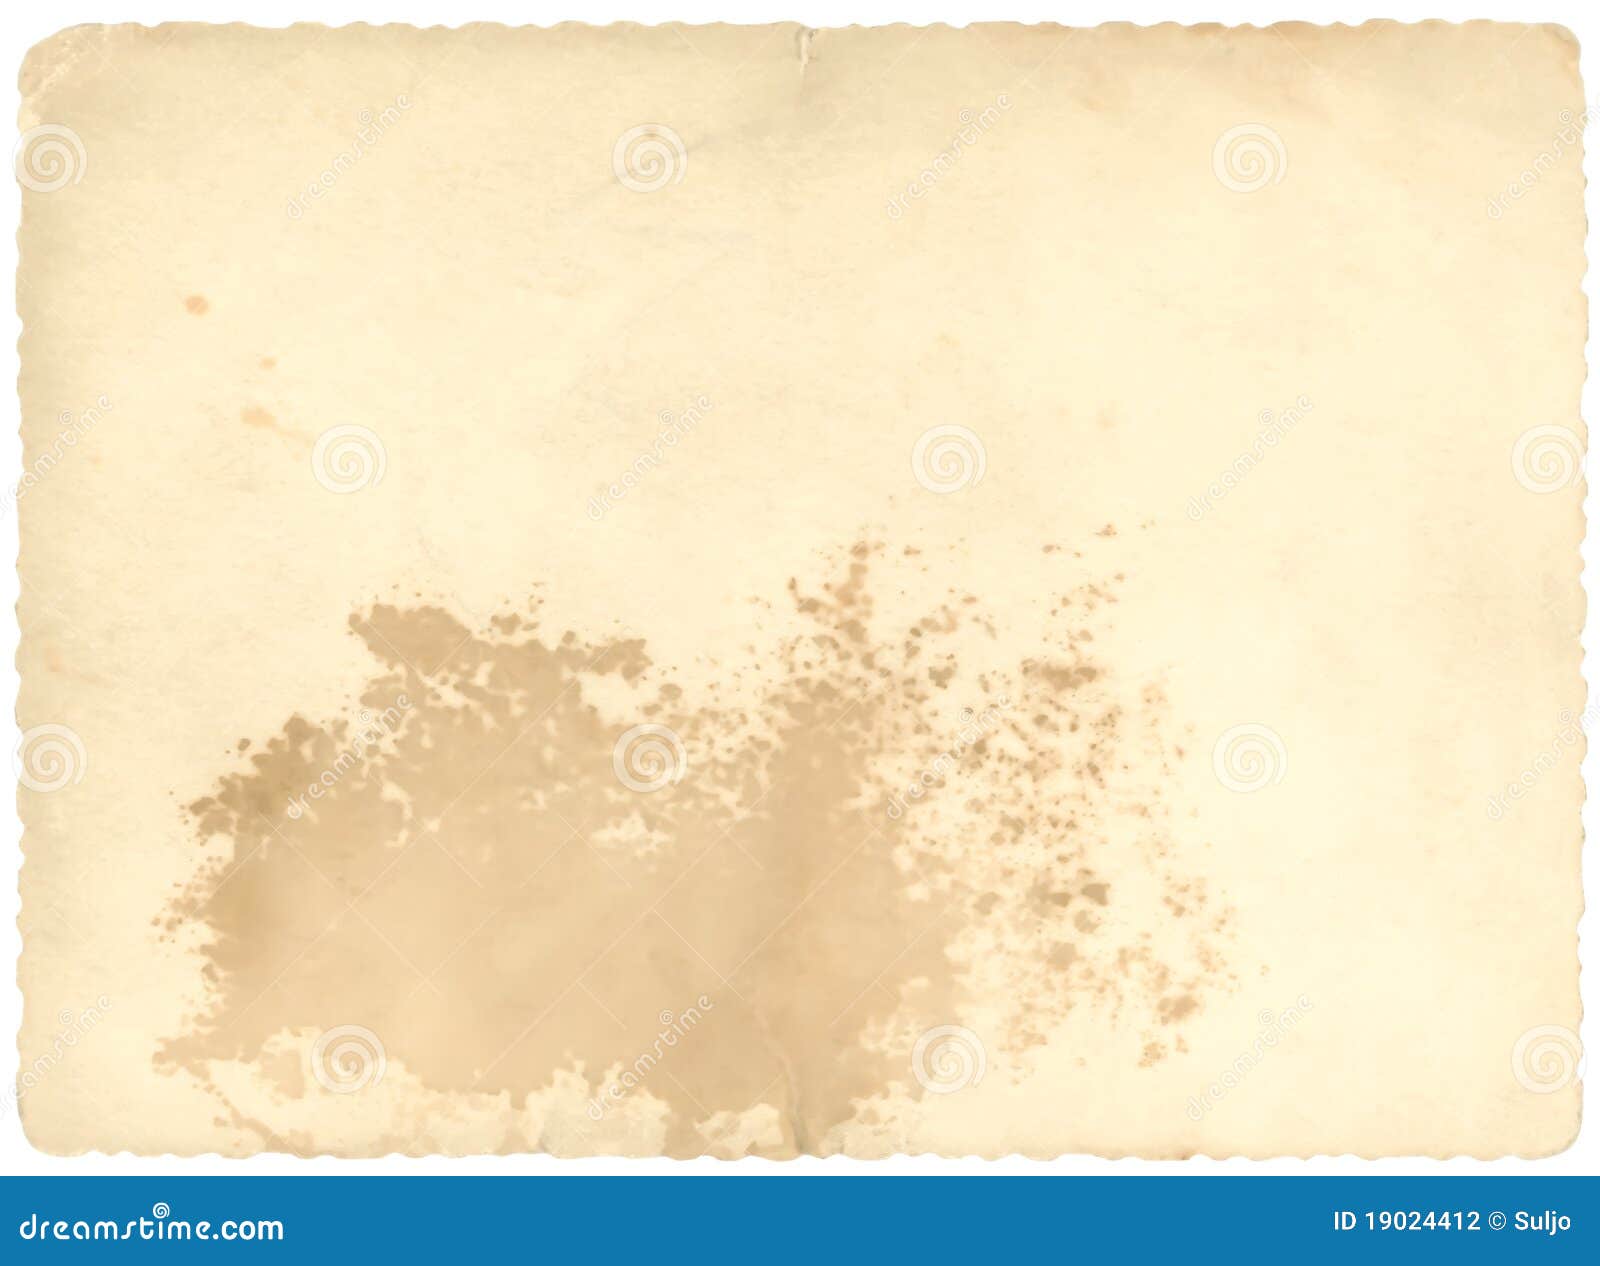 Old picture Paper stock photo. Image of blank, retro - 19024412